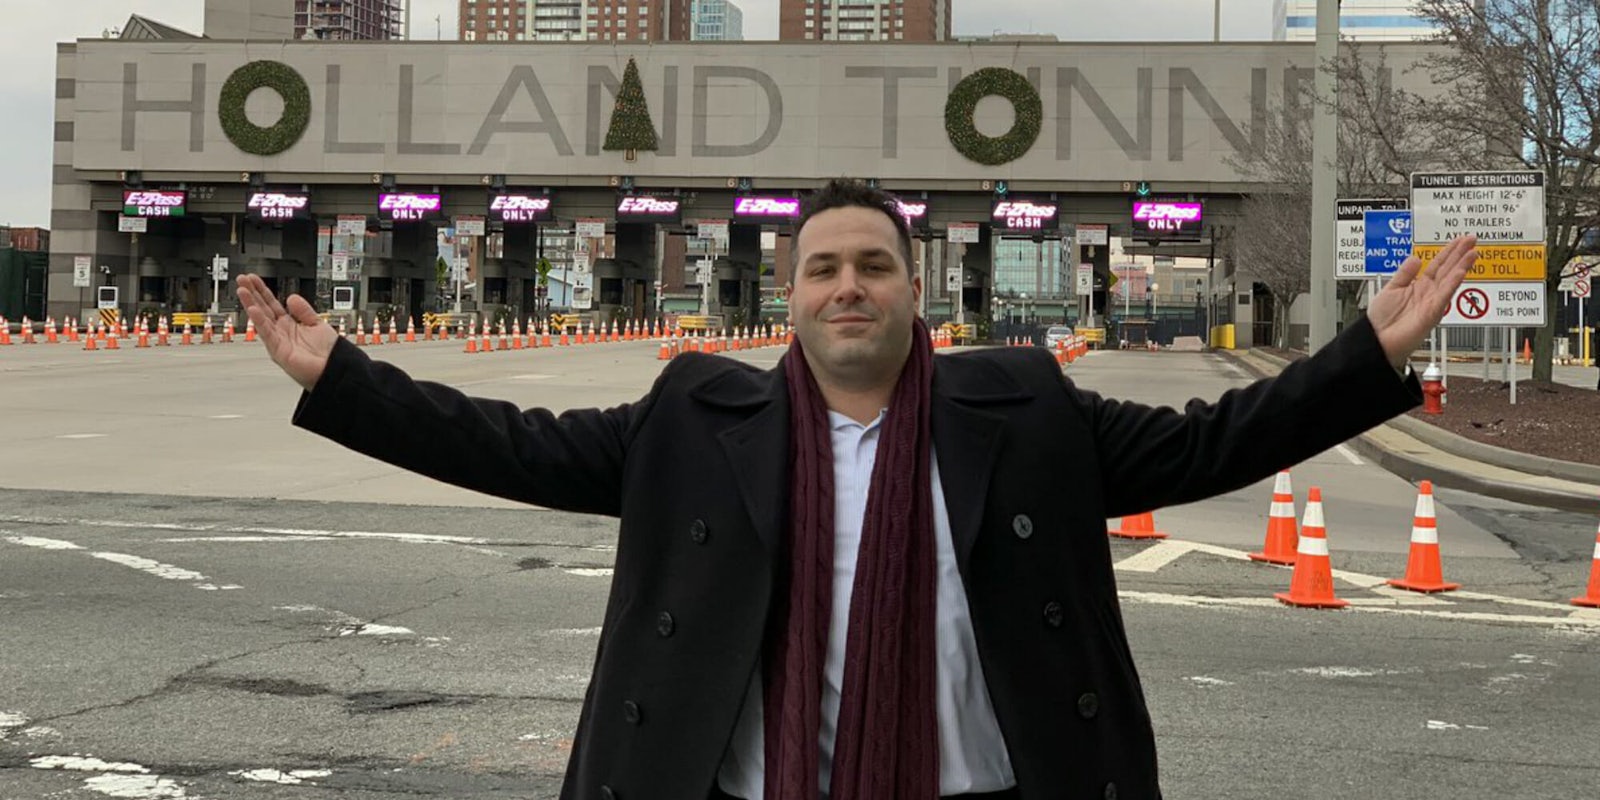 One Twitter user turned the 'Hollaad Tonnel' back into the 'Holland Tunnel.'